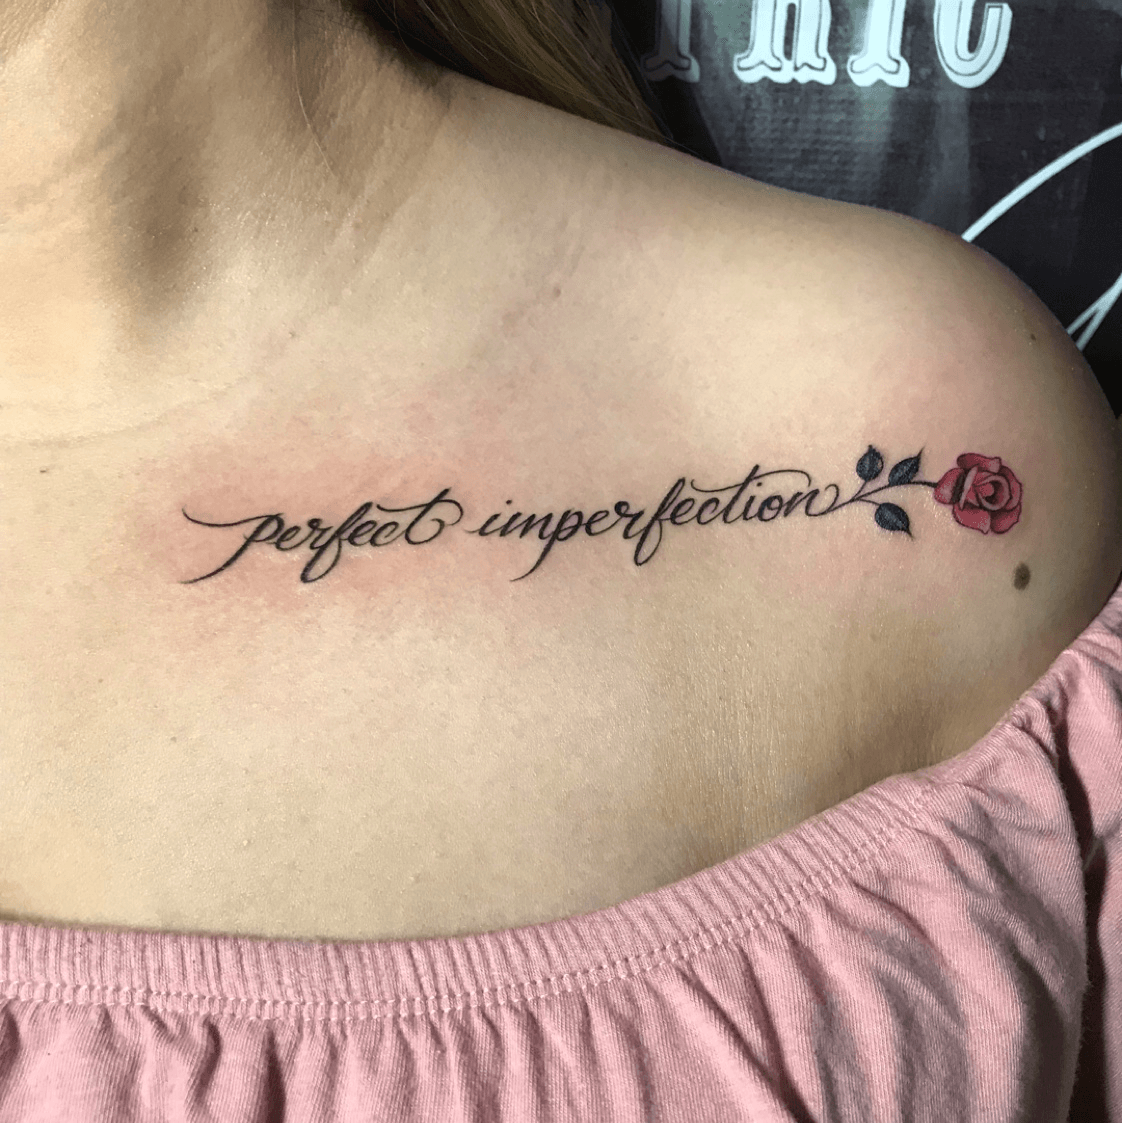 Perfectly imperfect lettering tattoo done on the